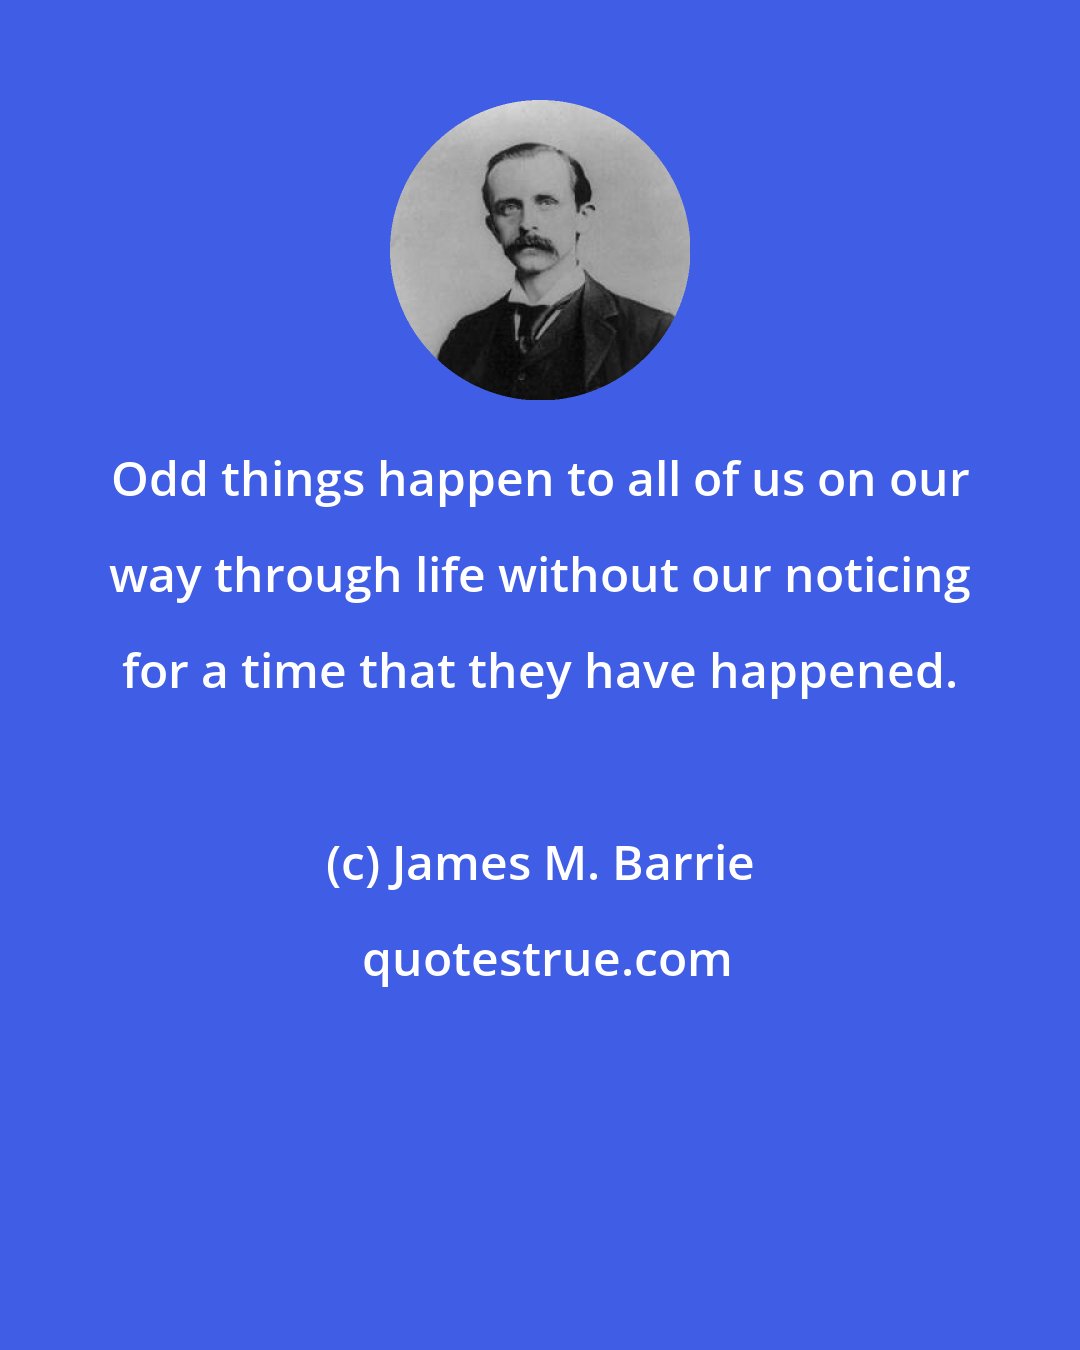 James M. Barrie: Odd things happen to all of us on our way through life without our noticing for a time that they have happened.